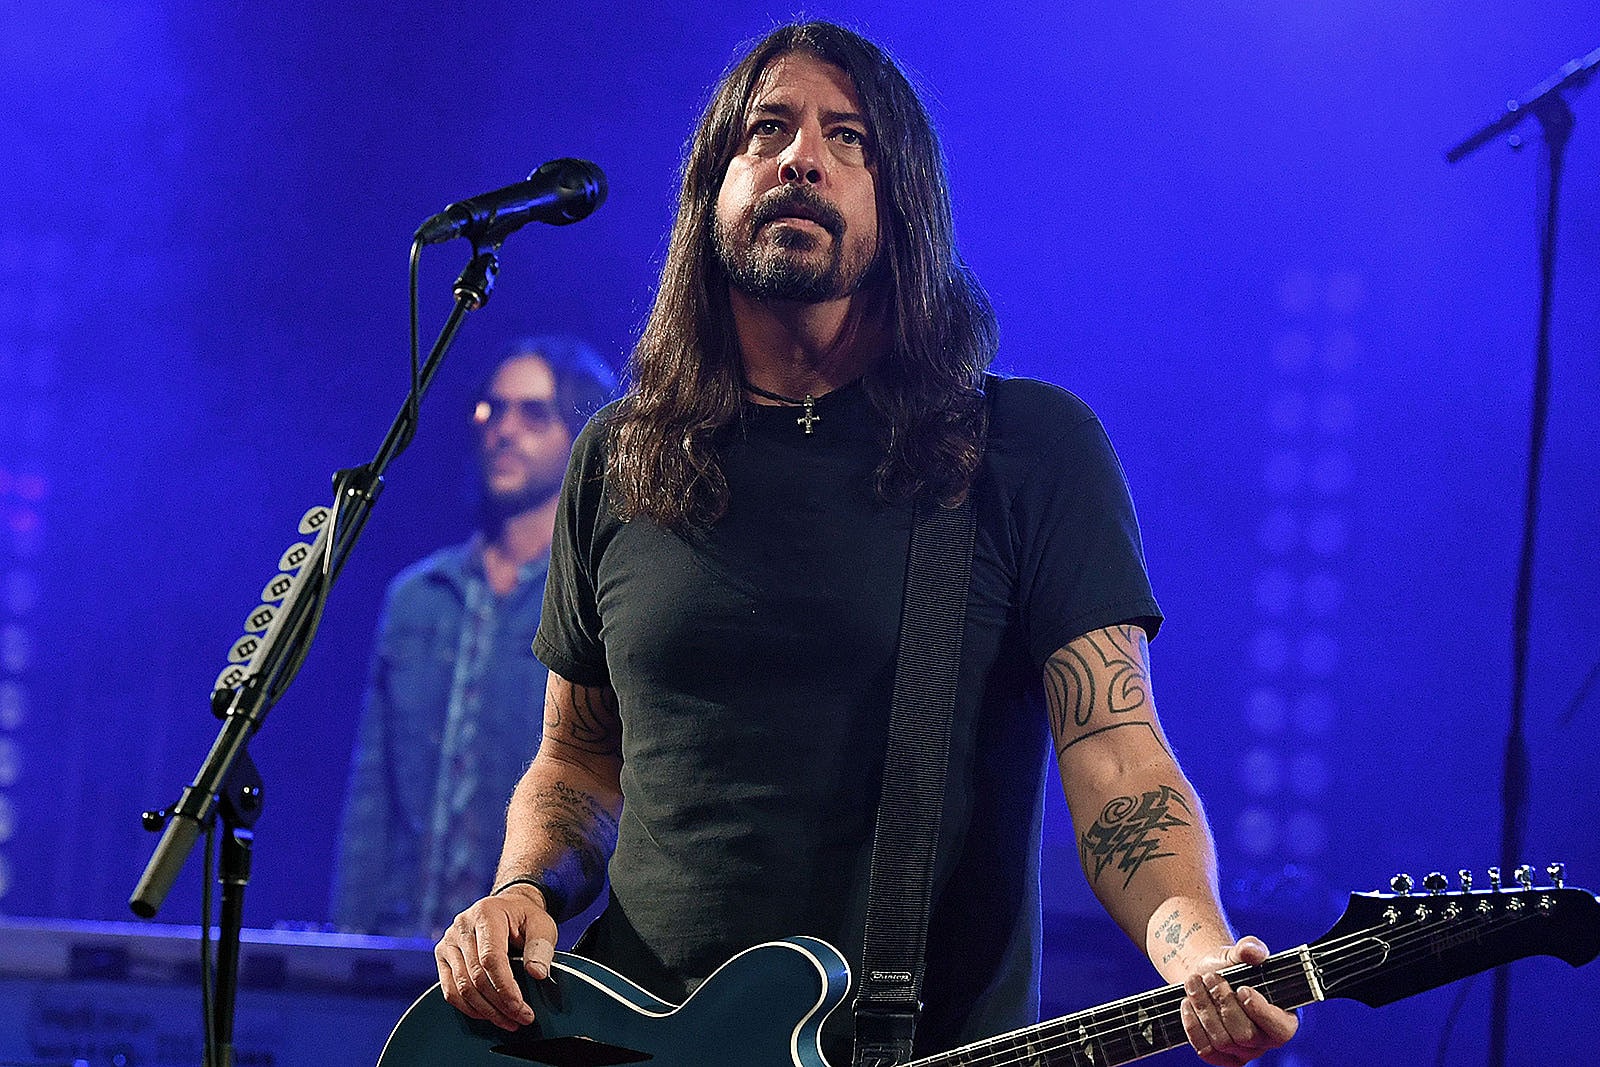 Dave Grohl Sets Release Date for Dream Widow Metal EP - The DJ Sessions